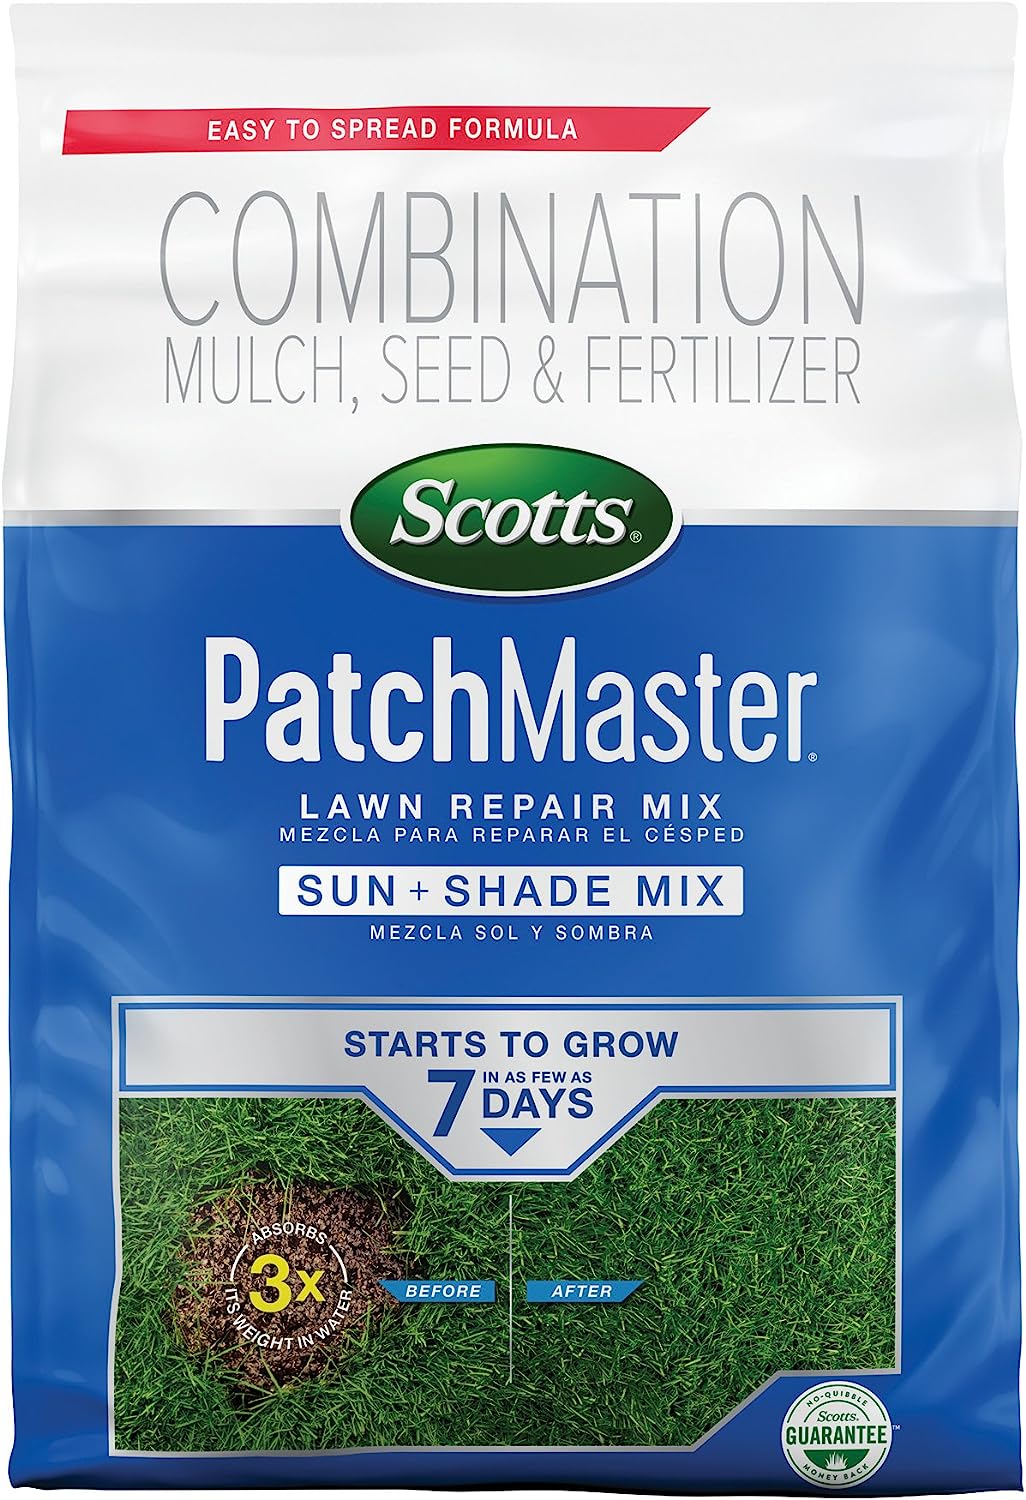 Scotts PatchMaster Lawn Repair Mix Sun + Shade Mix, [...]